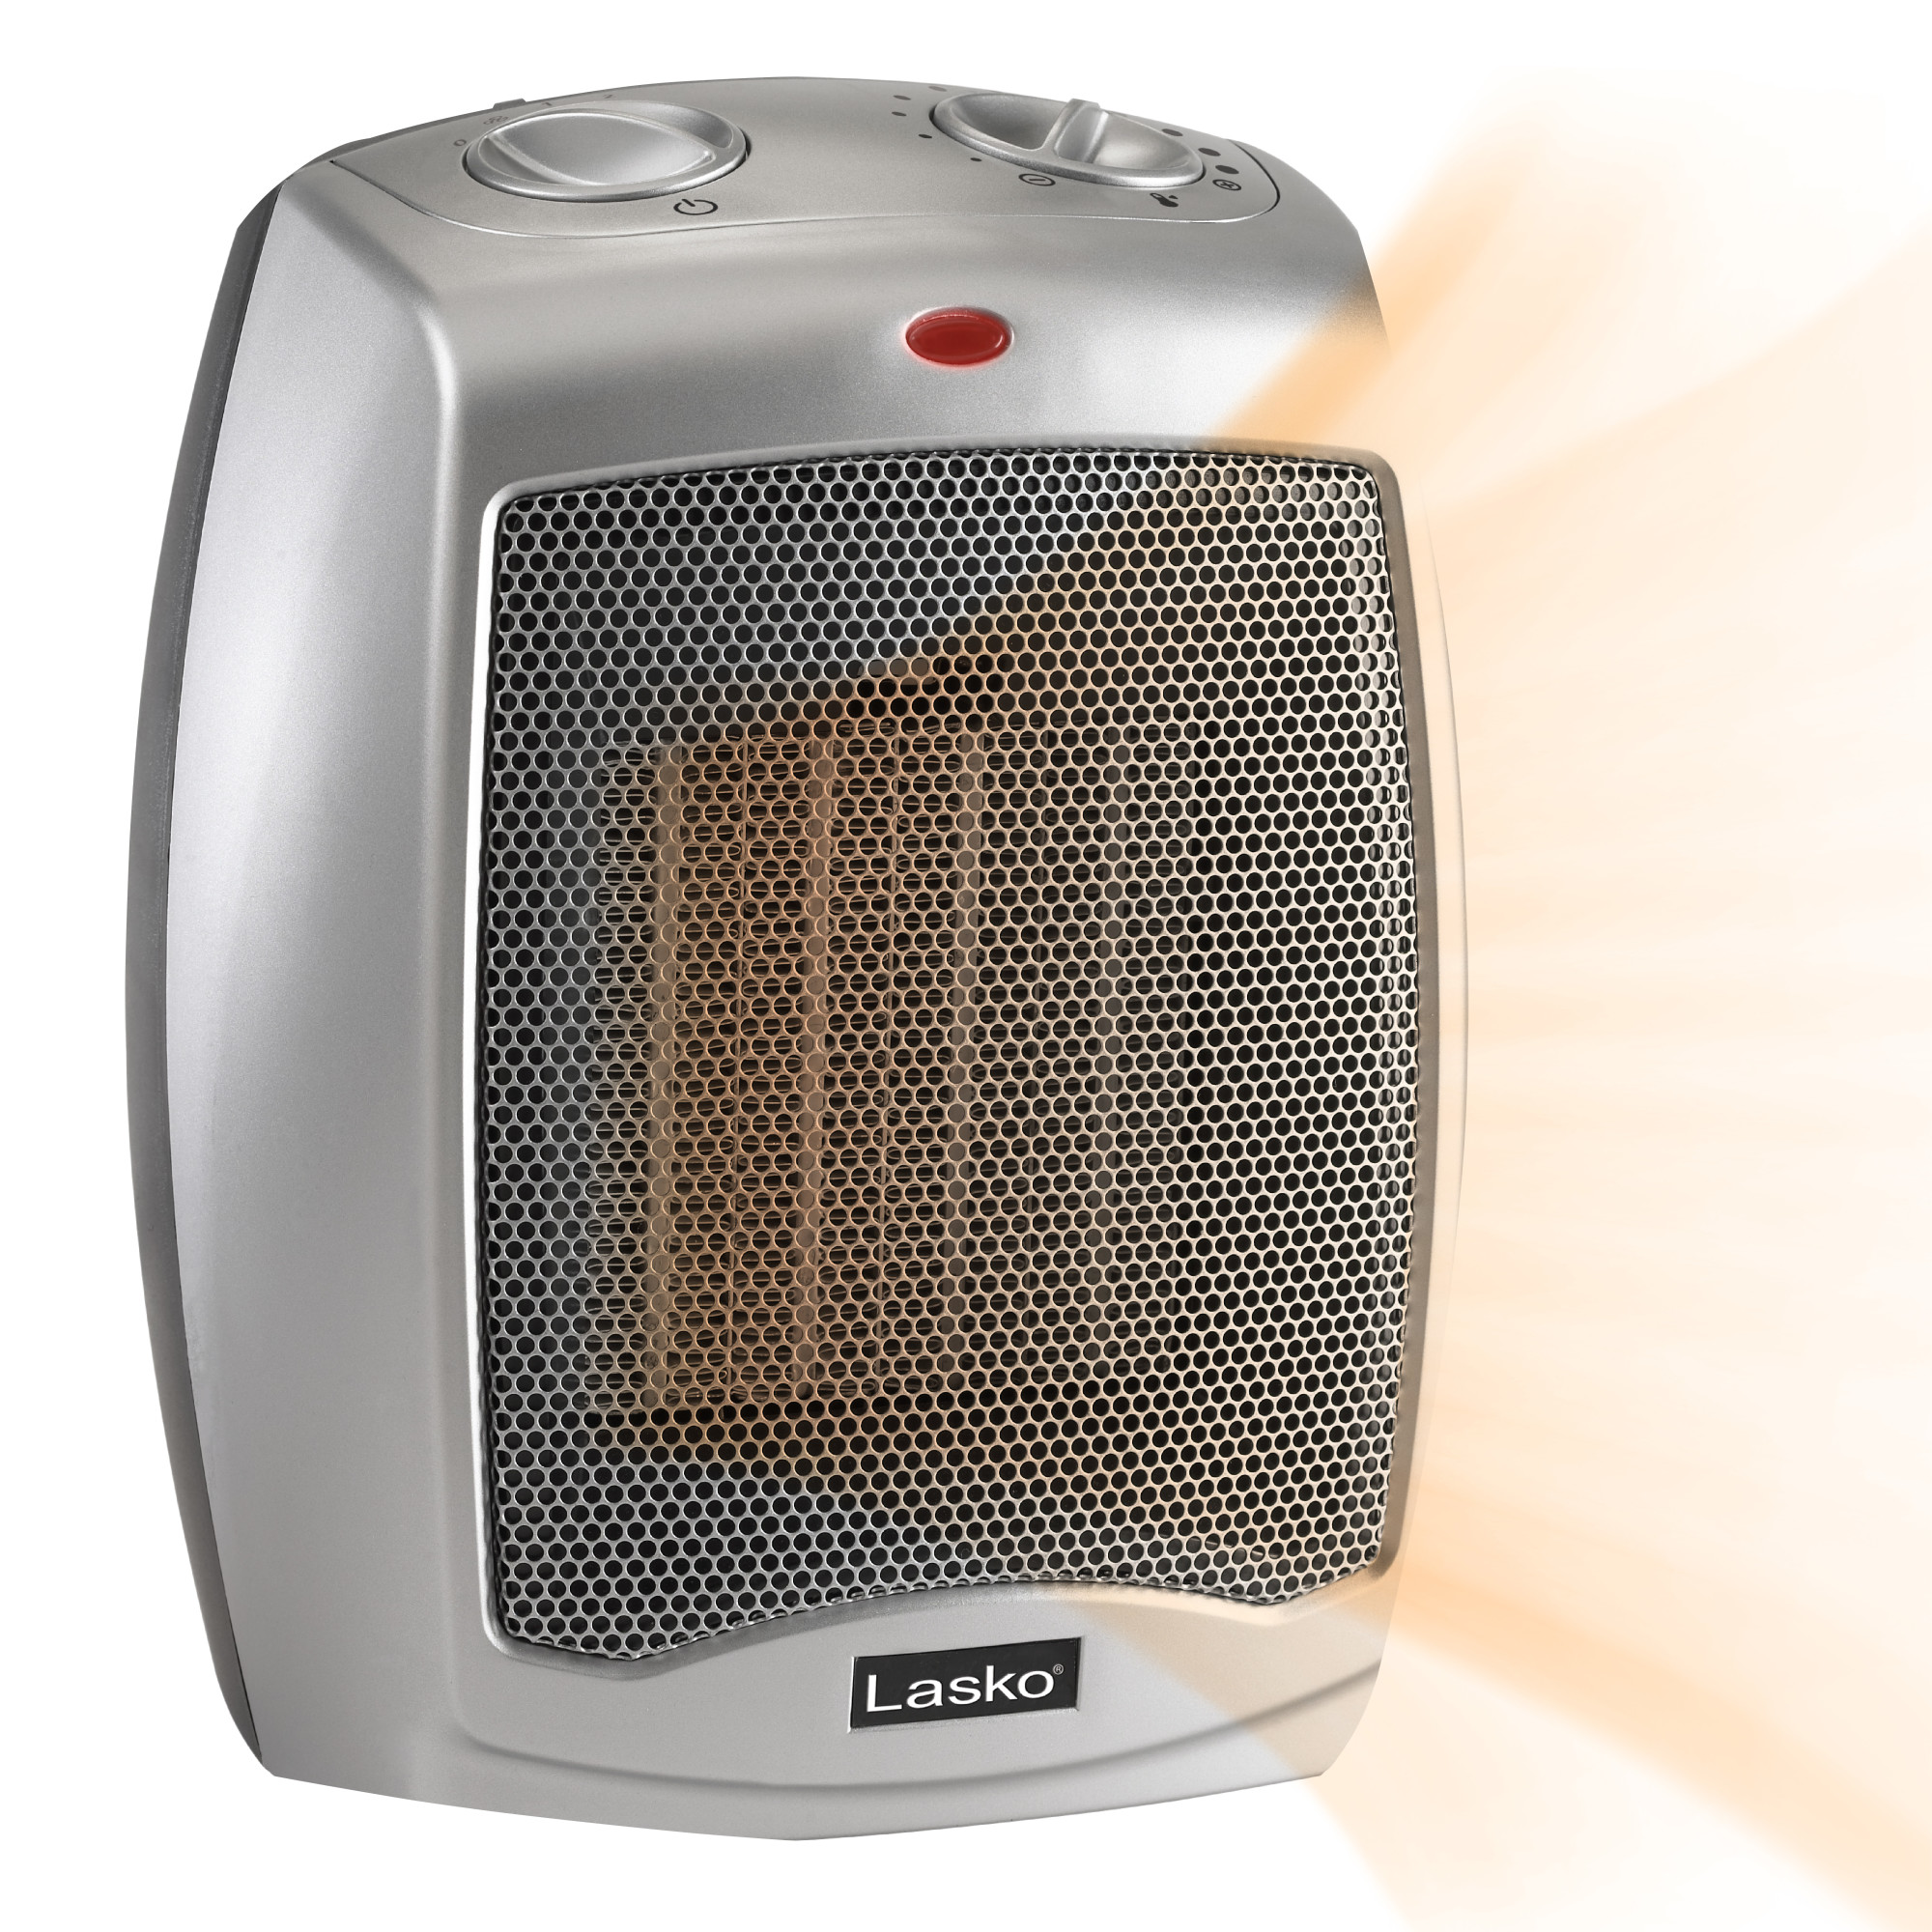 Lasko 9" 1500W Electric Ceramic Space Heater with Adjustable Thermostat, Silver, 754200, New - image 1 of 6